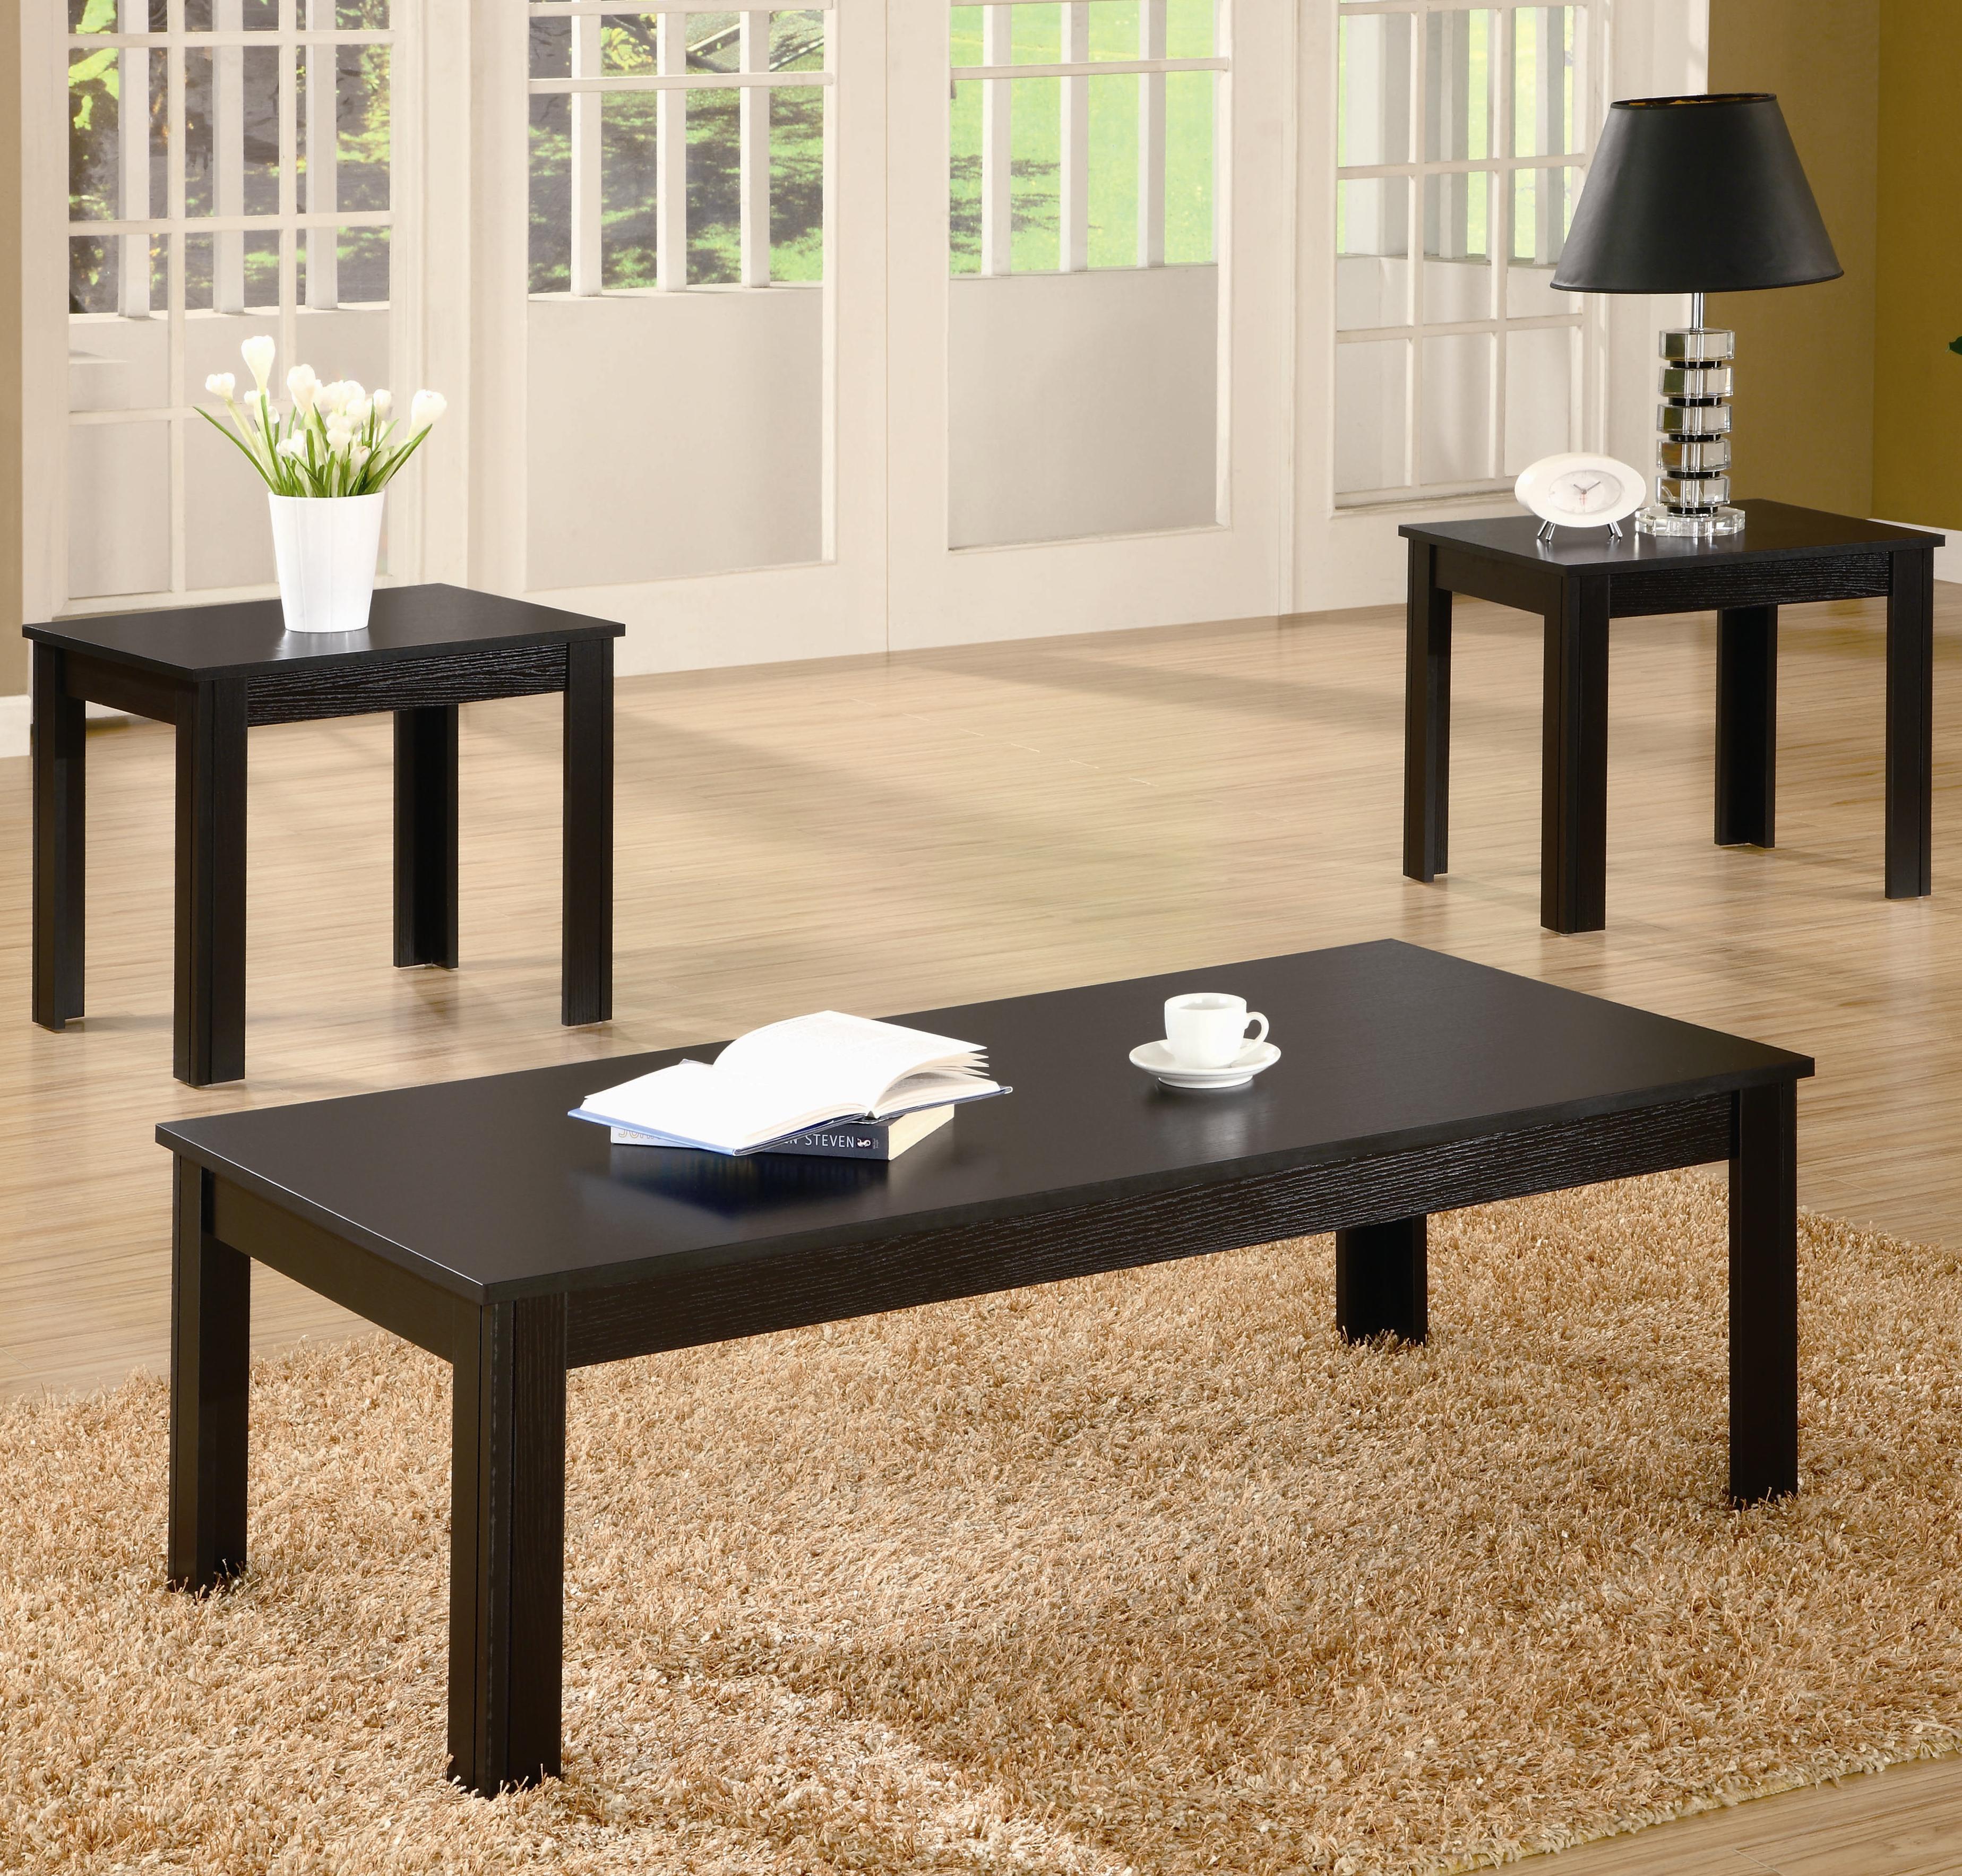 coffee tables ideas modern table and end set ashley black pieces occasional three living room decoration square rectangle shapes with matching lamps thin bedside home office